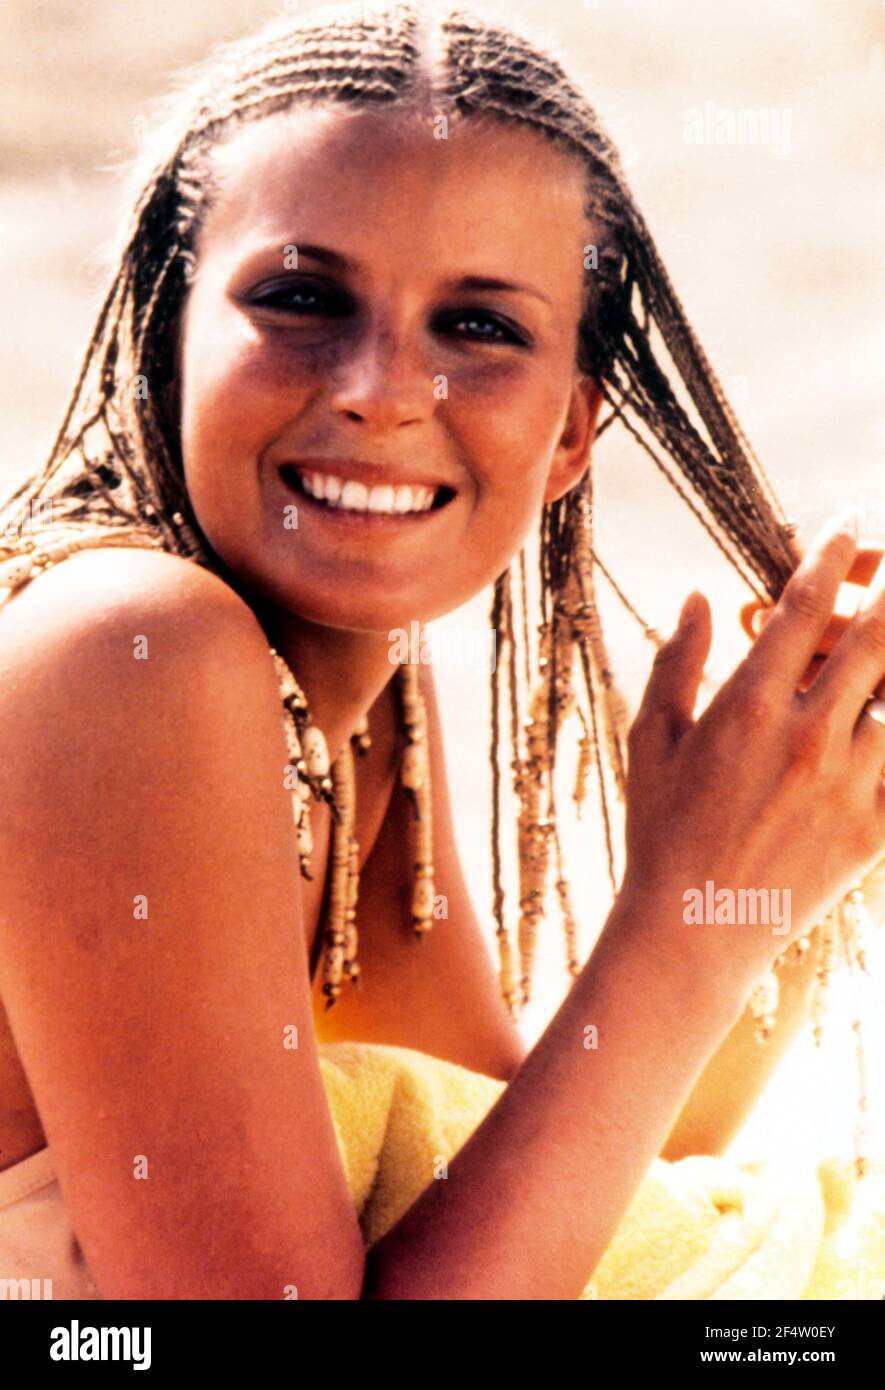 BO DEREK in 10 (1979), directed by BLAKE EDWARDS. Credit: Geoffrey Productions/Orion Pictures / Album Stock Photo